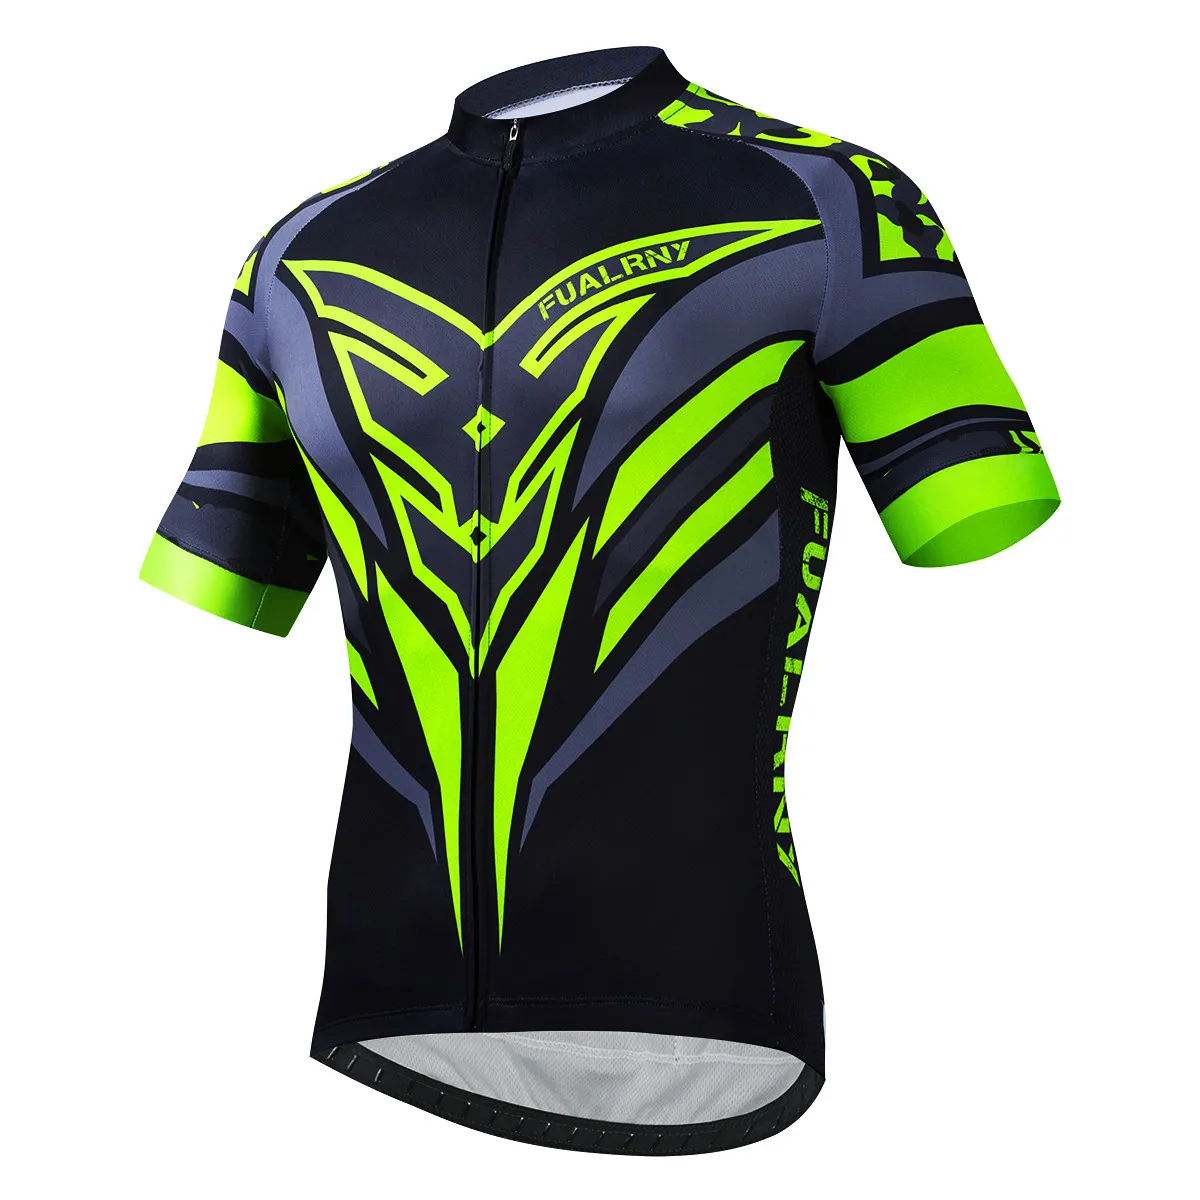 2022 Square Summer Pro Cycling Jersey traspirante Team Racing Sport Bicycle Tops Mens Short Bike Clothing M36280T